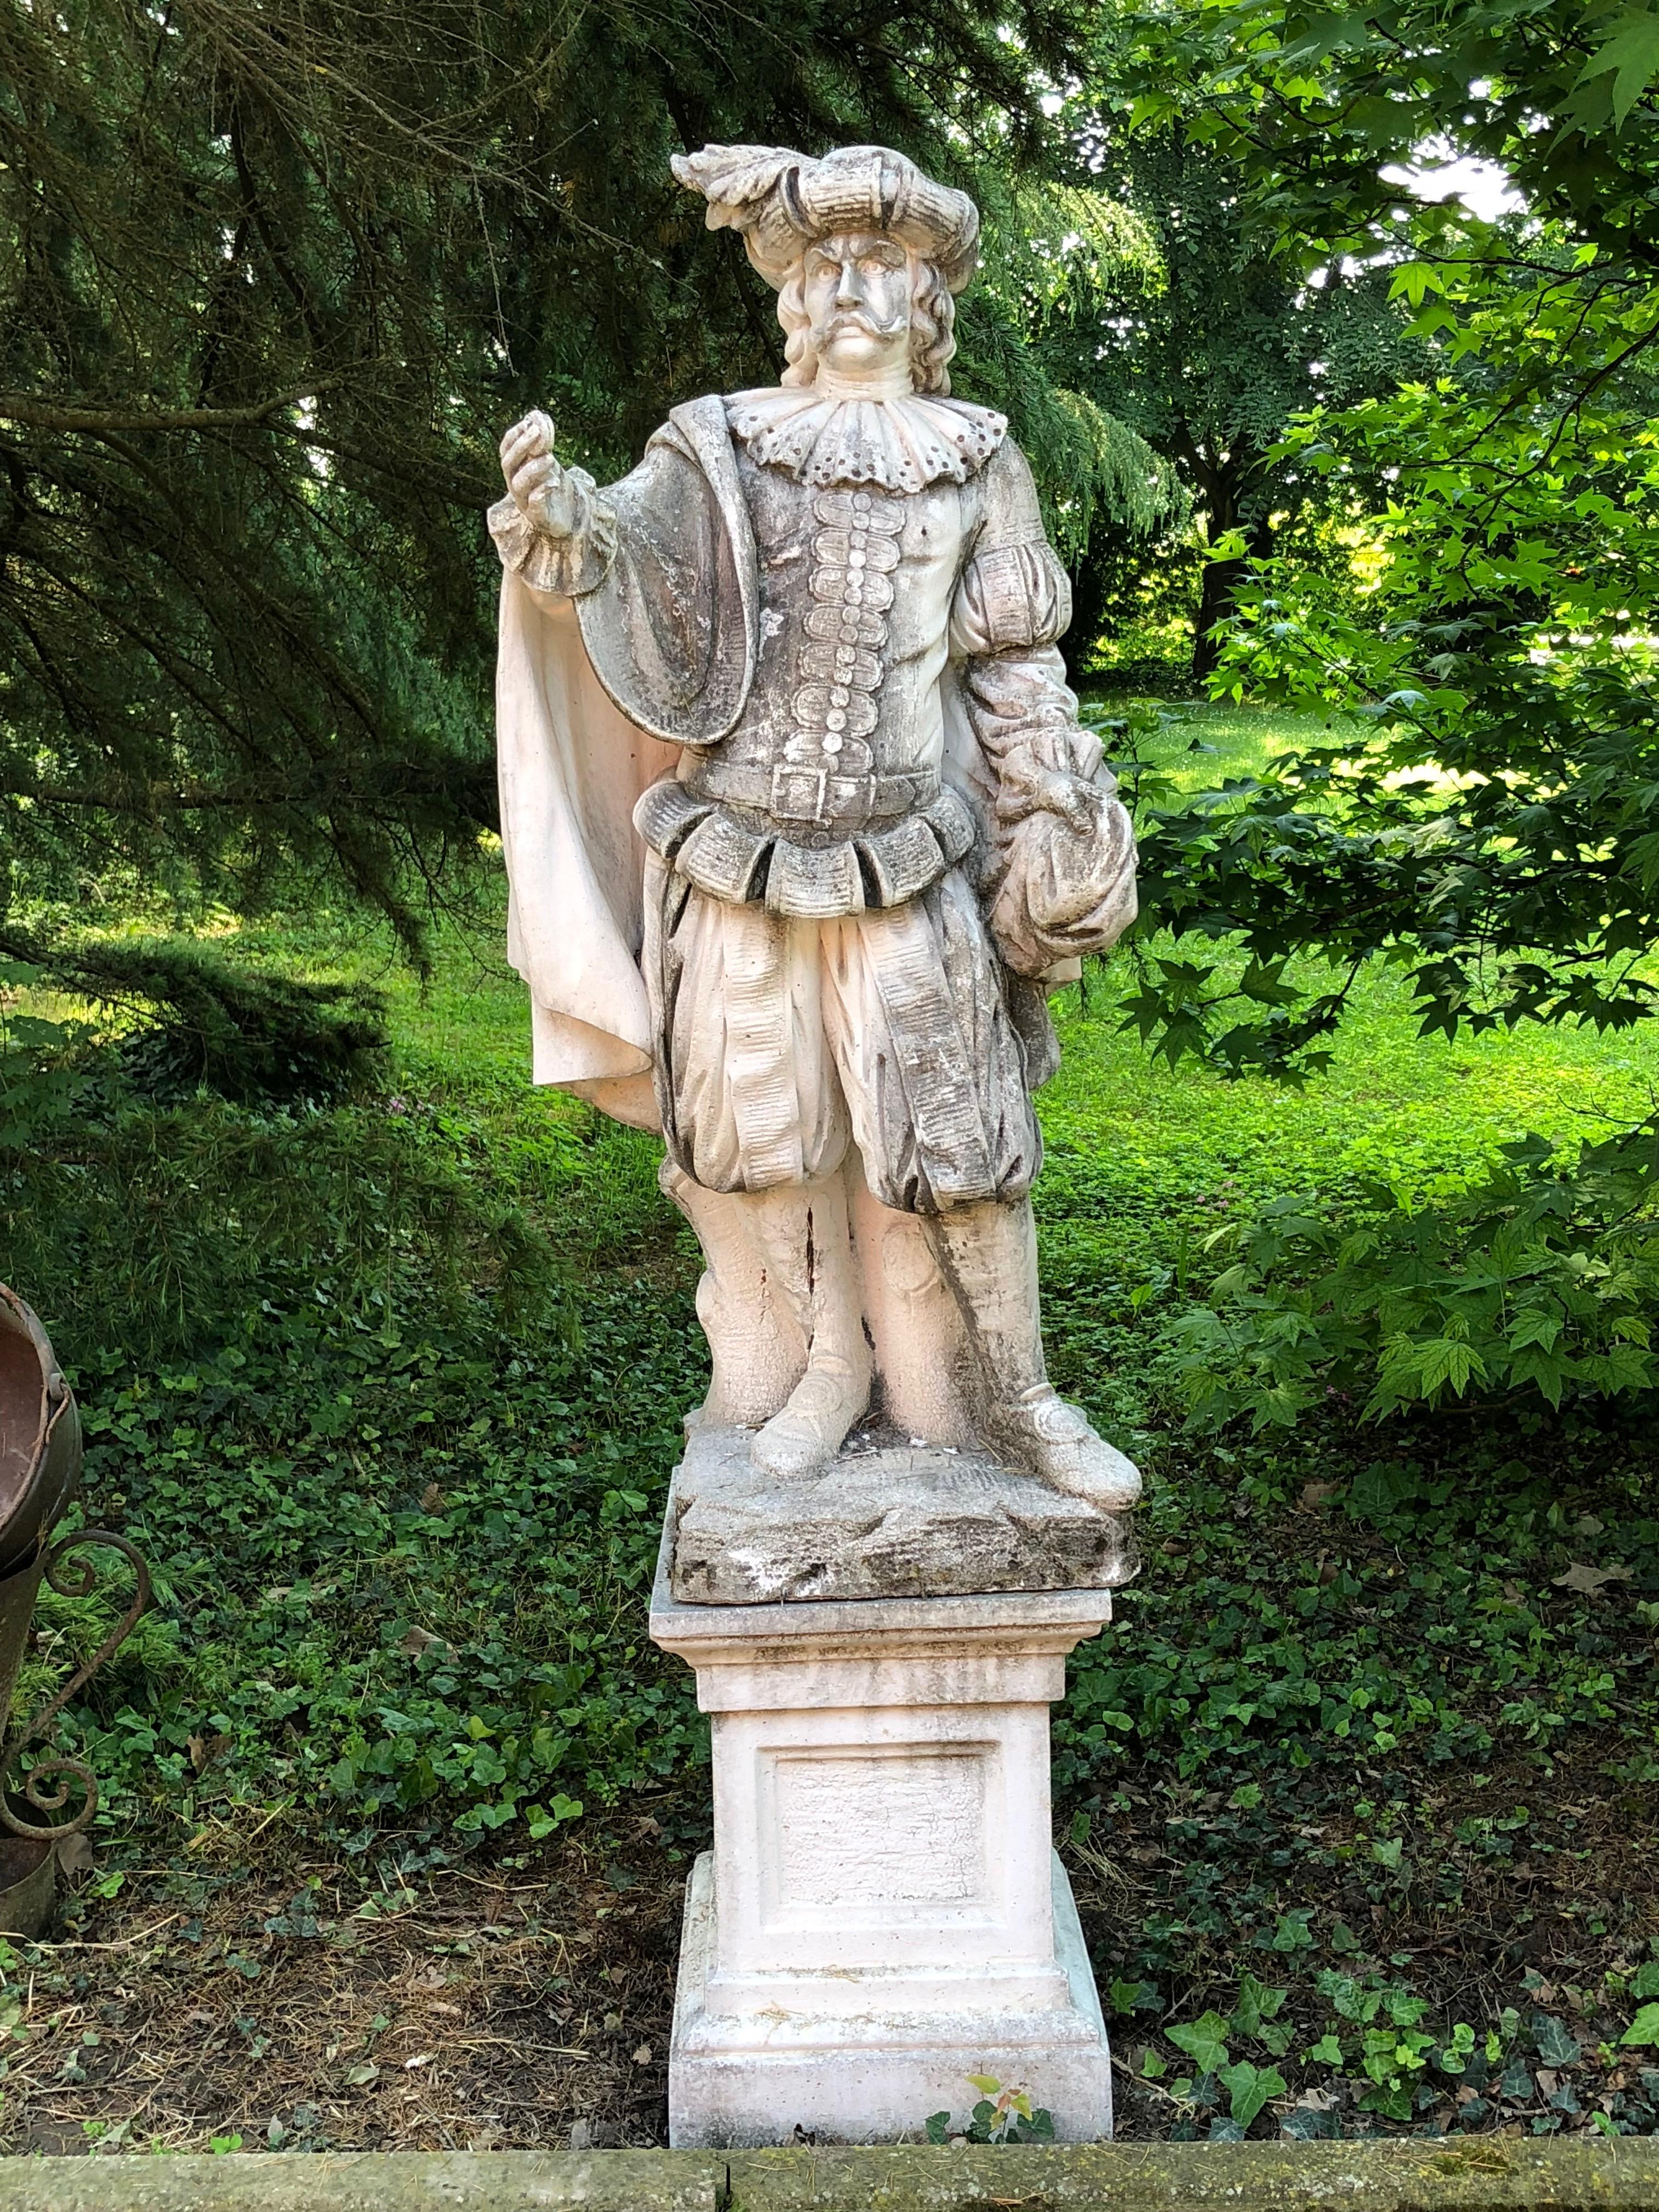 A decorative cement garden statue.
Sculpture total height: 200 cm
Base dimensions: 60 cm x 60 cm
Period: First years of the 20th century
Provenance: Italy, important house near the city of Padova, (Italy)
In good state of conservation.